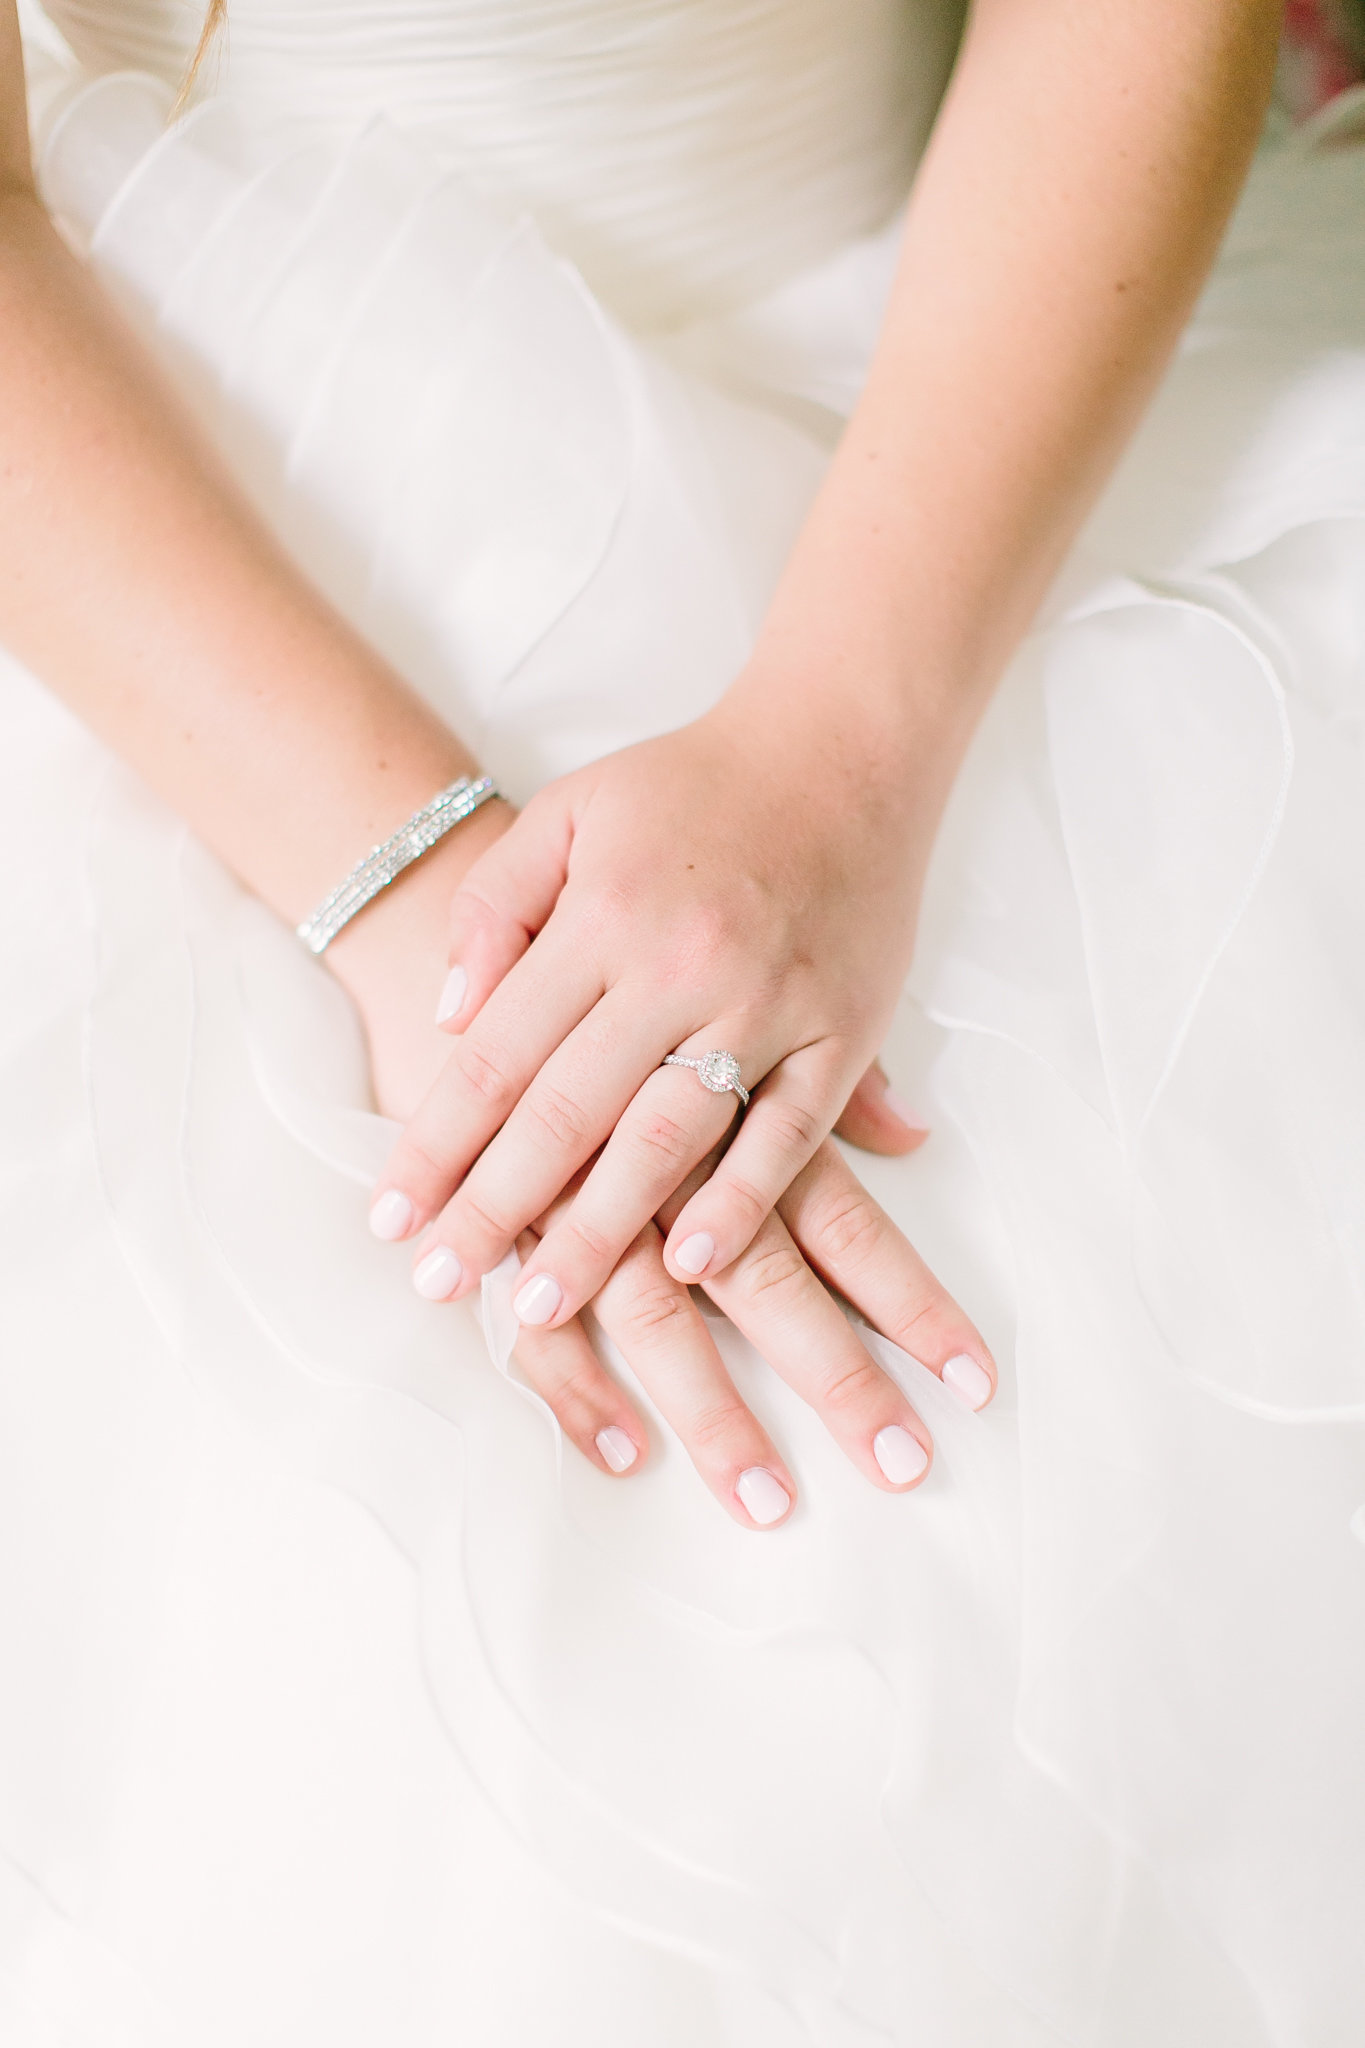 brides hands with diamond bracelet and ring